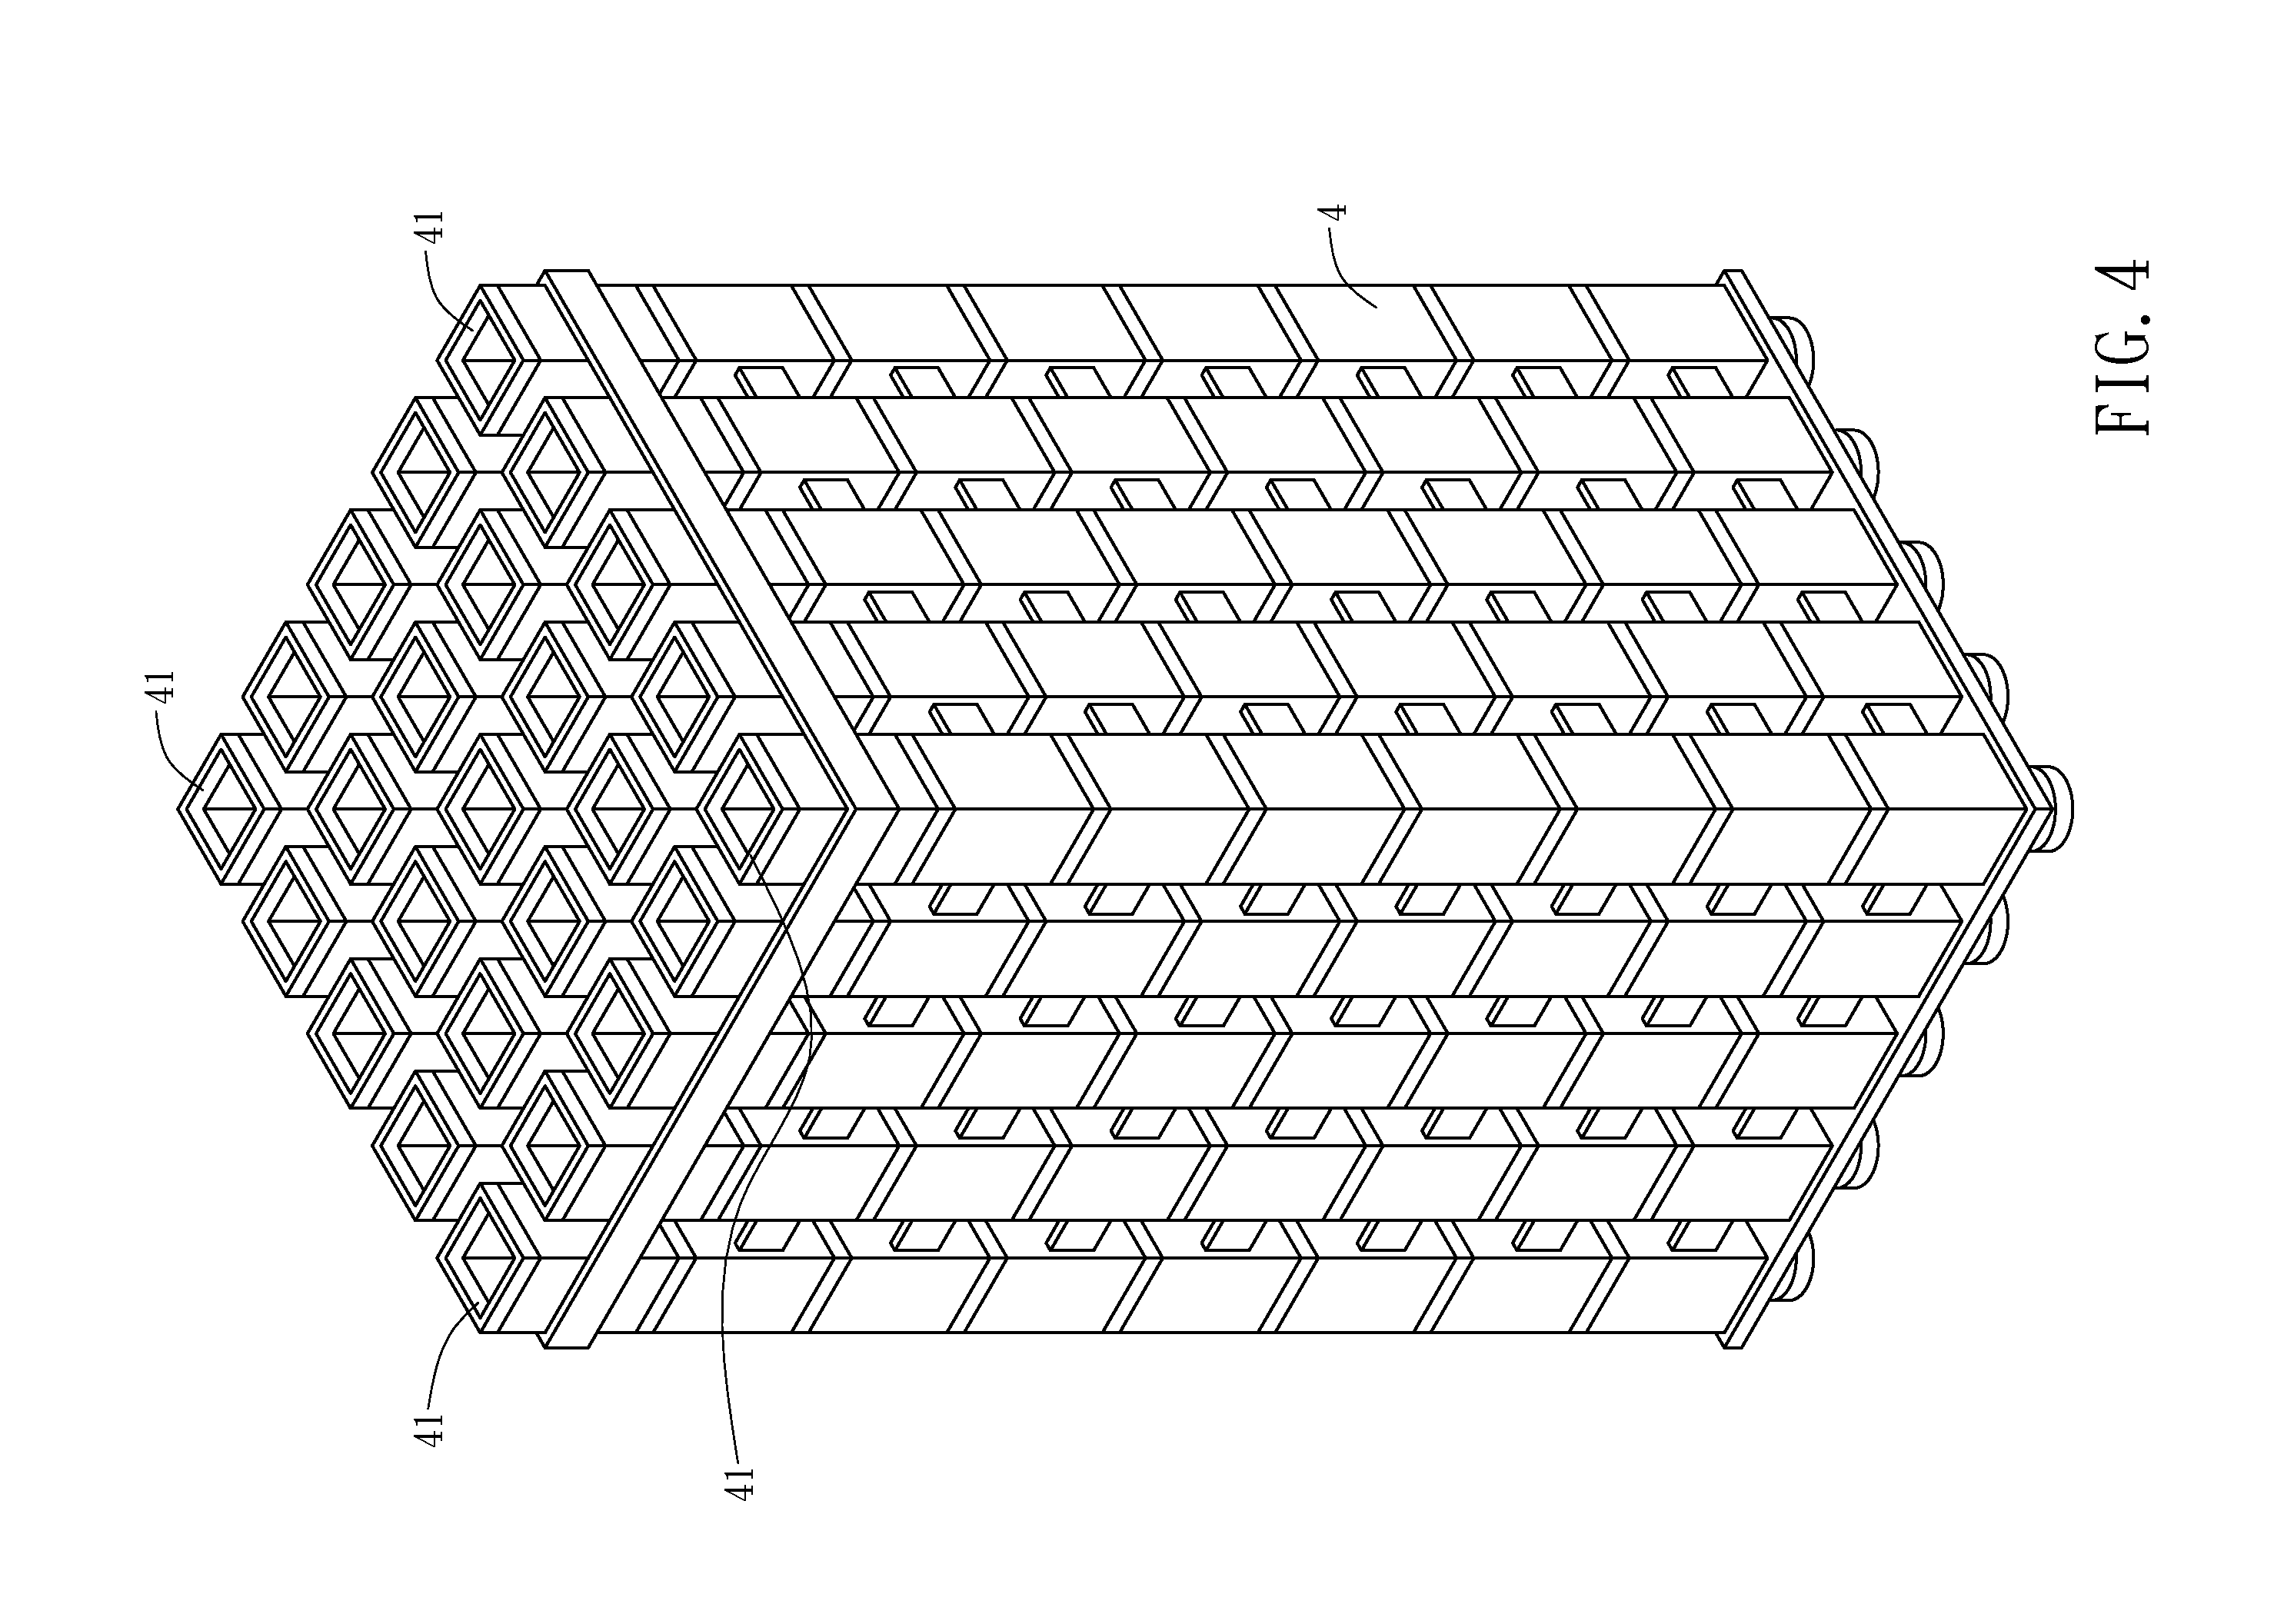 Nuclear fuel arrangement in fuel pools for nuclear power plant